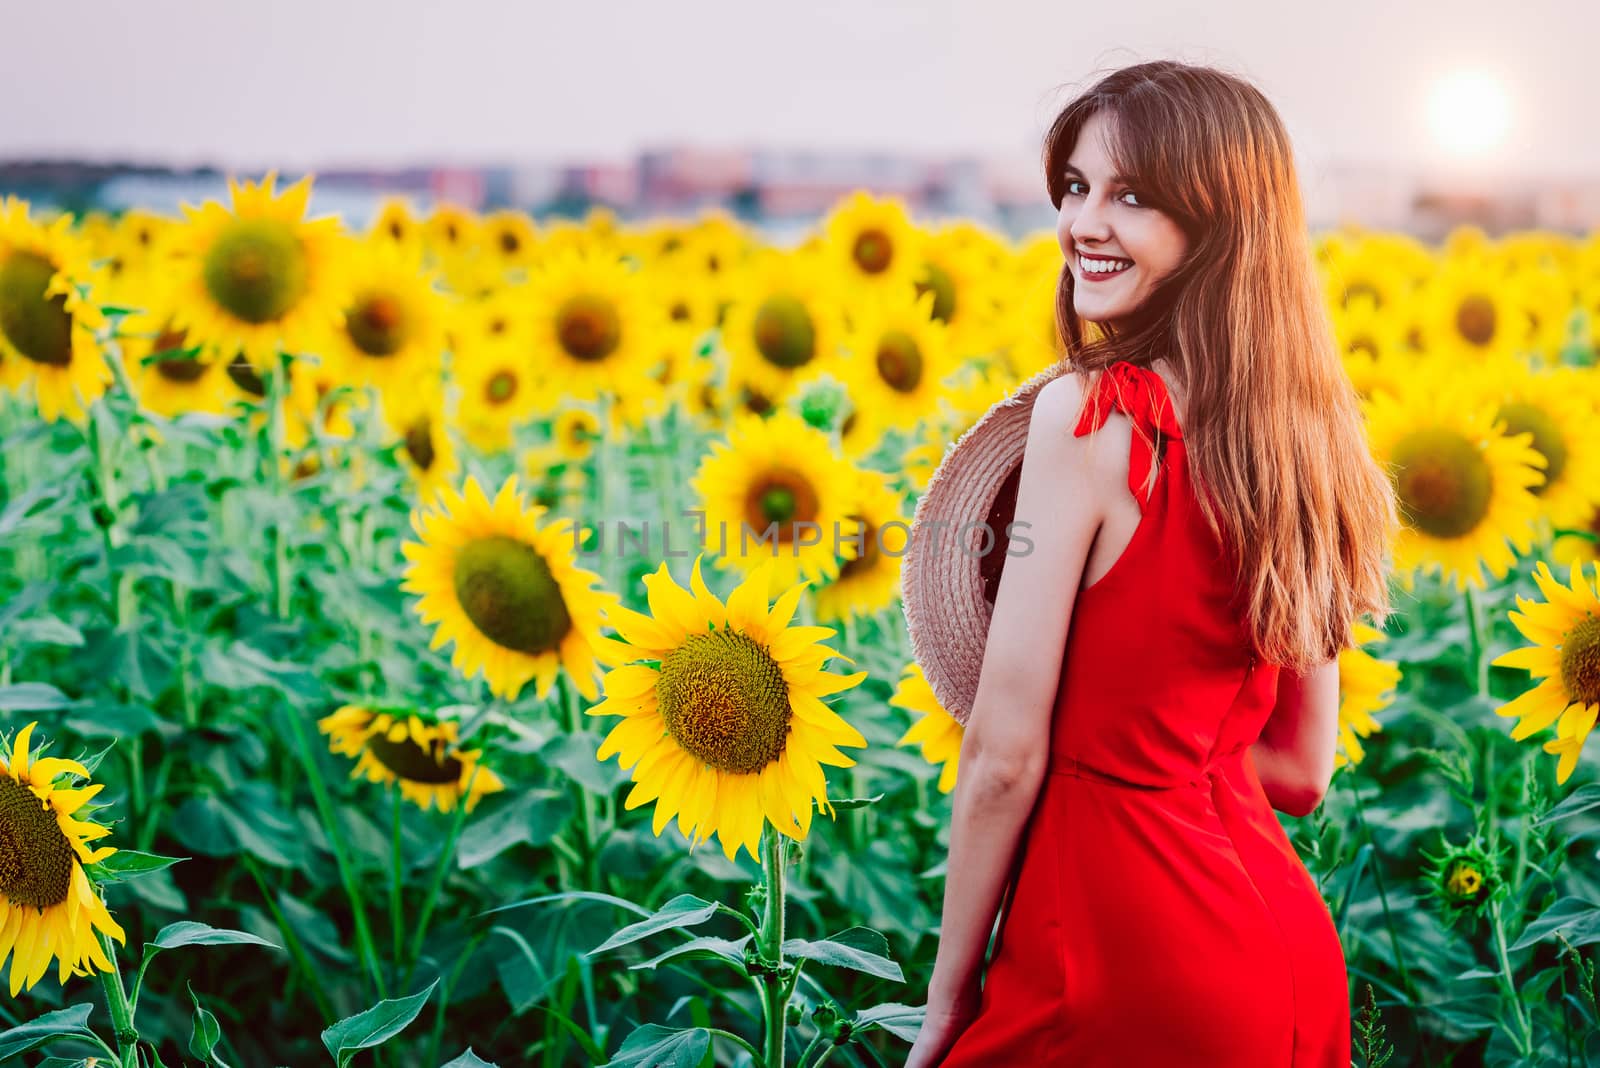 woman with red dress and hat in sunflowers field.